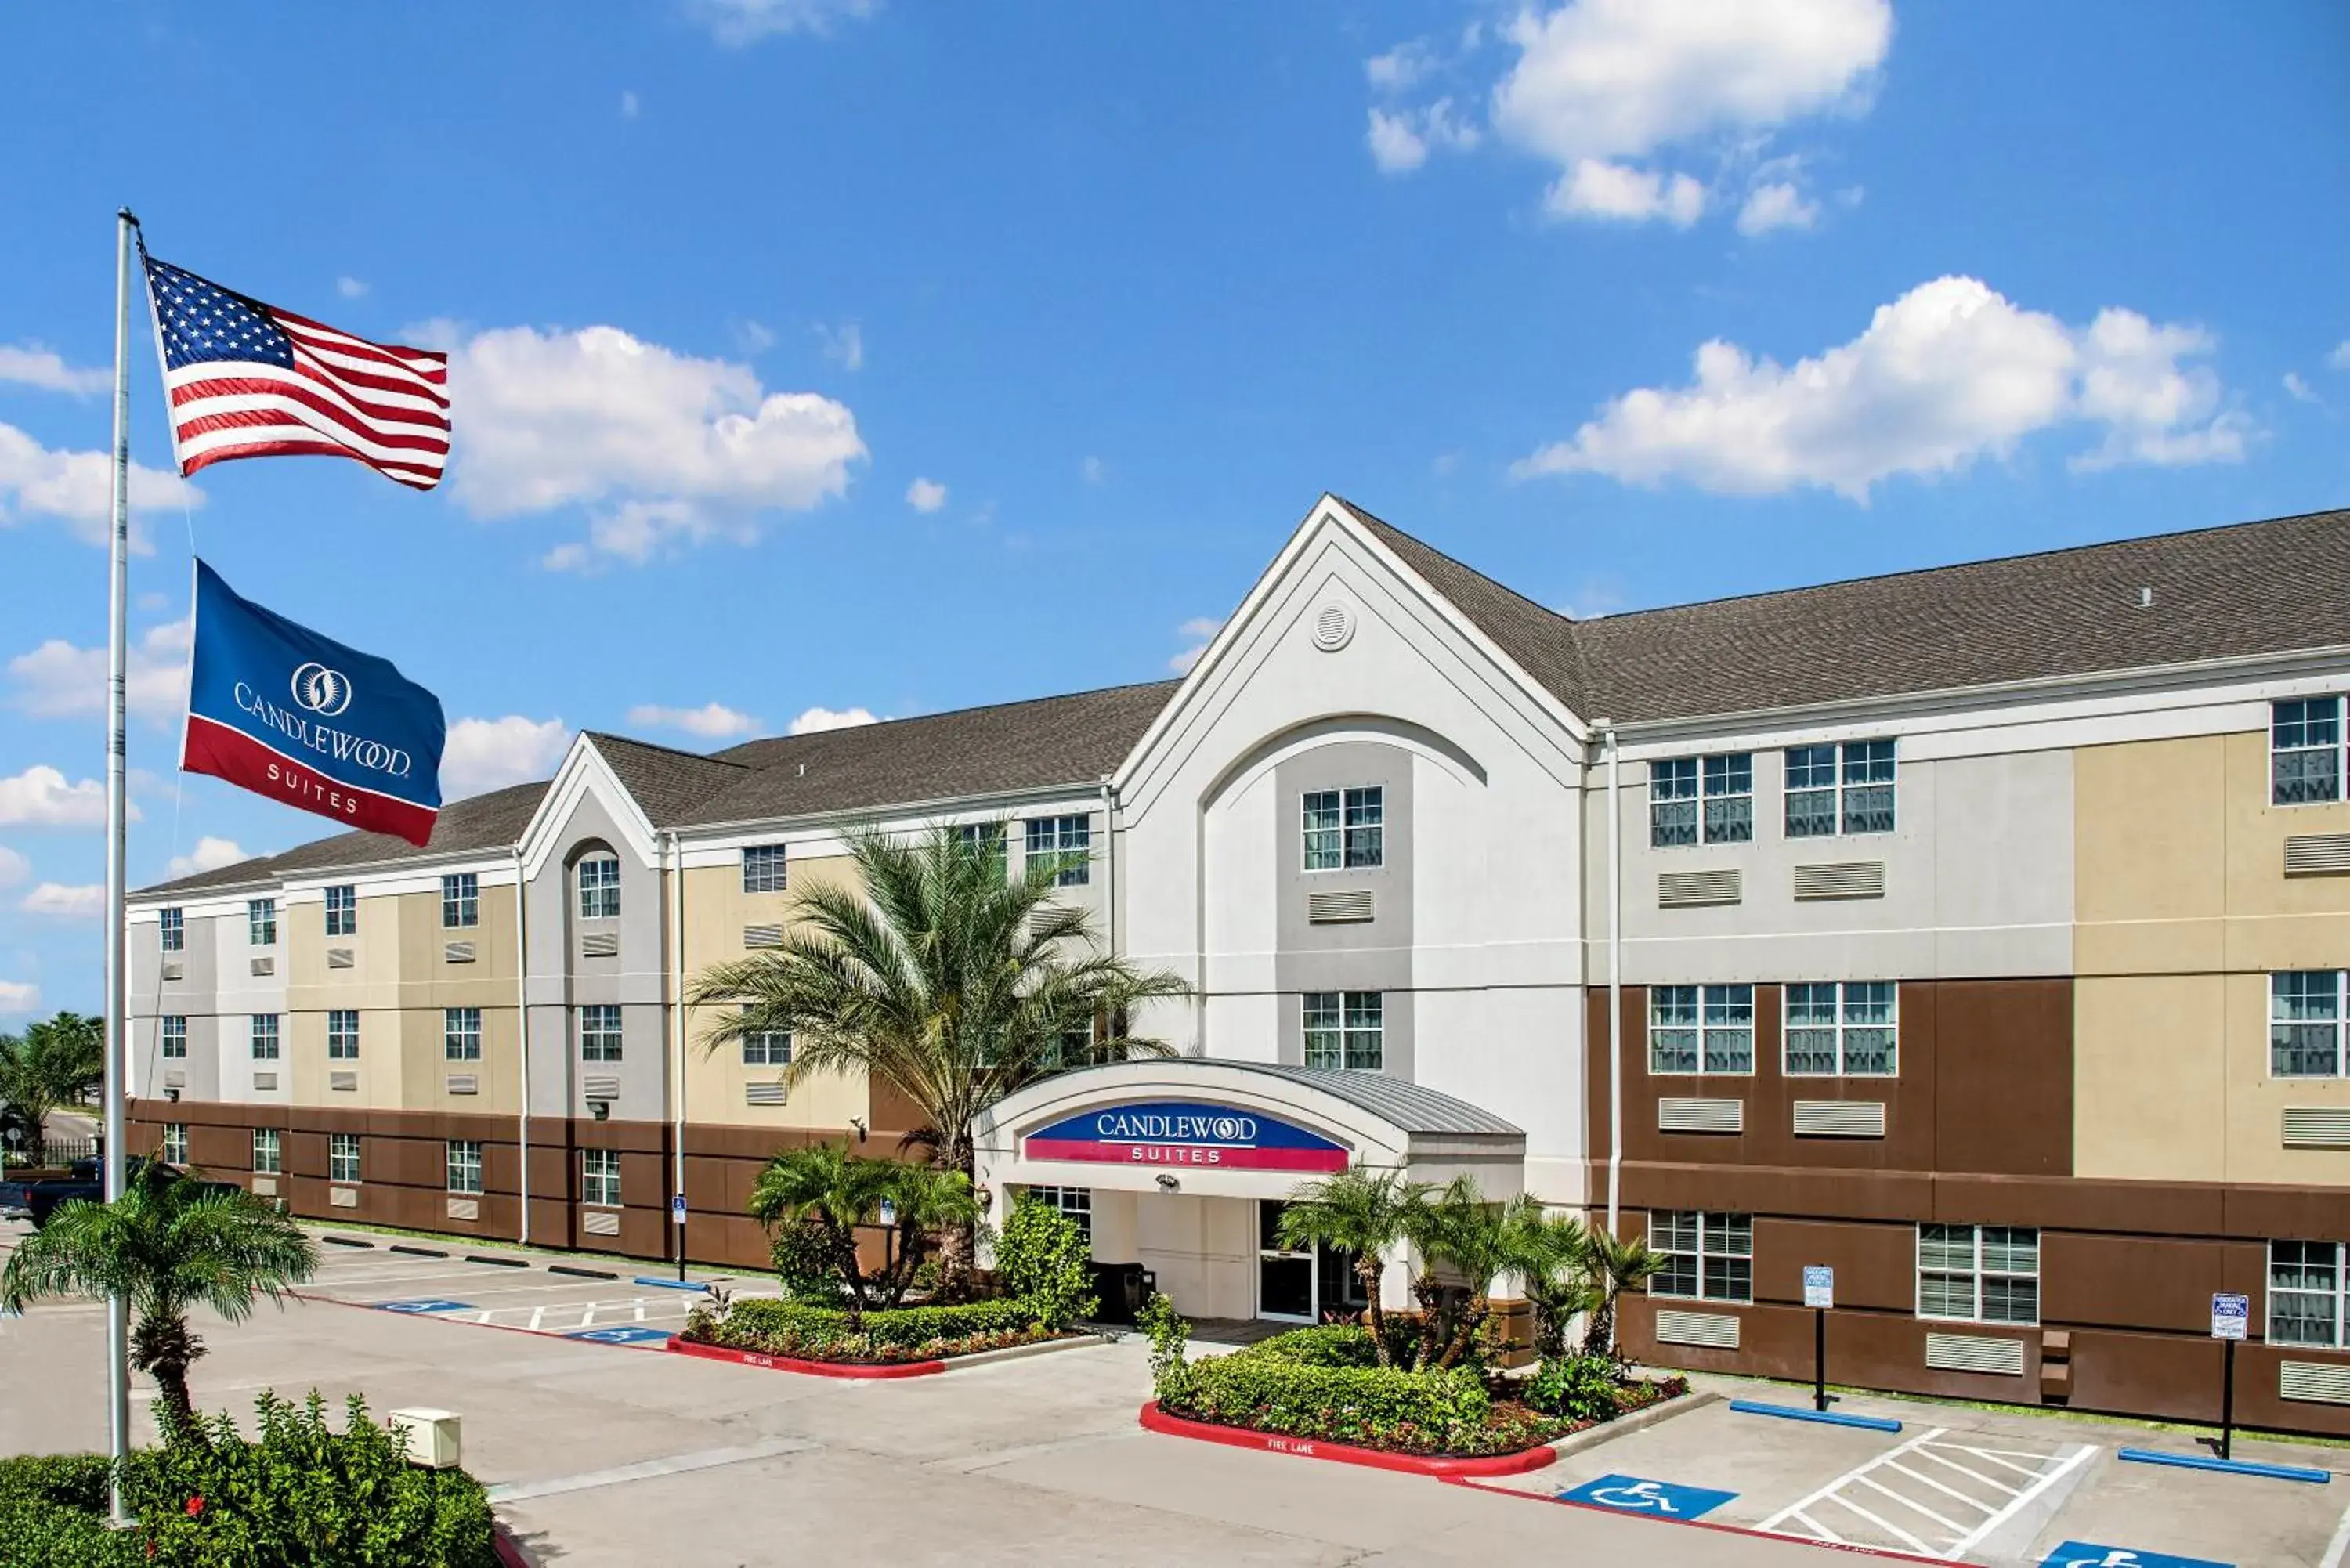 Property Building in Candlewood Suites Galveston